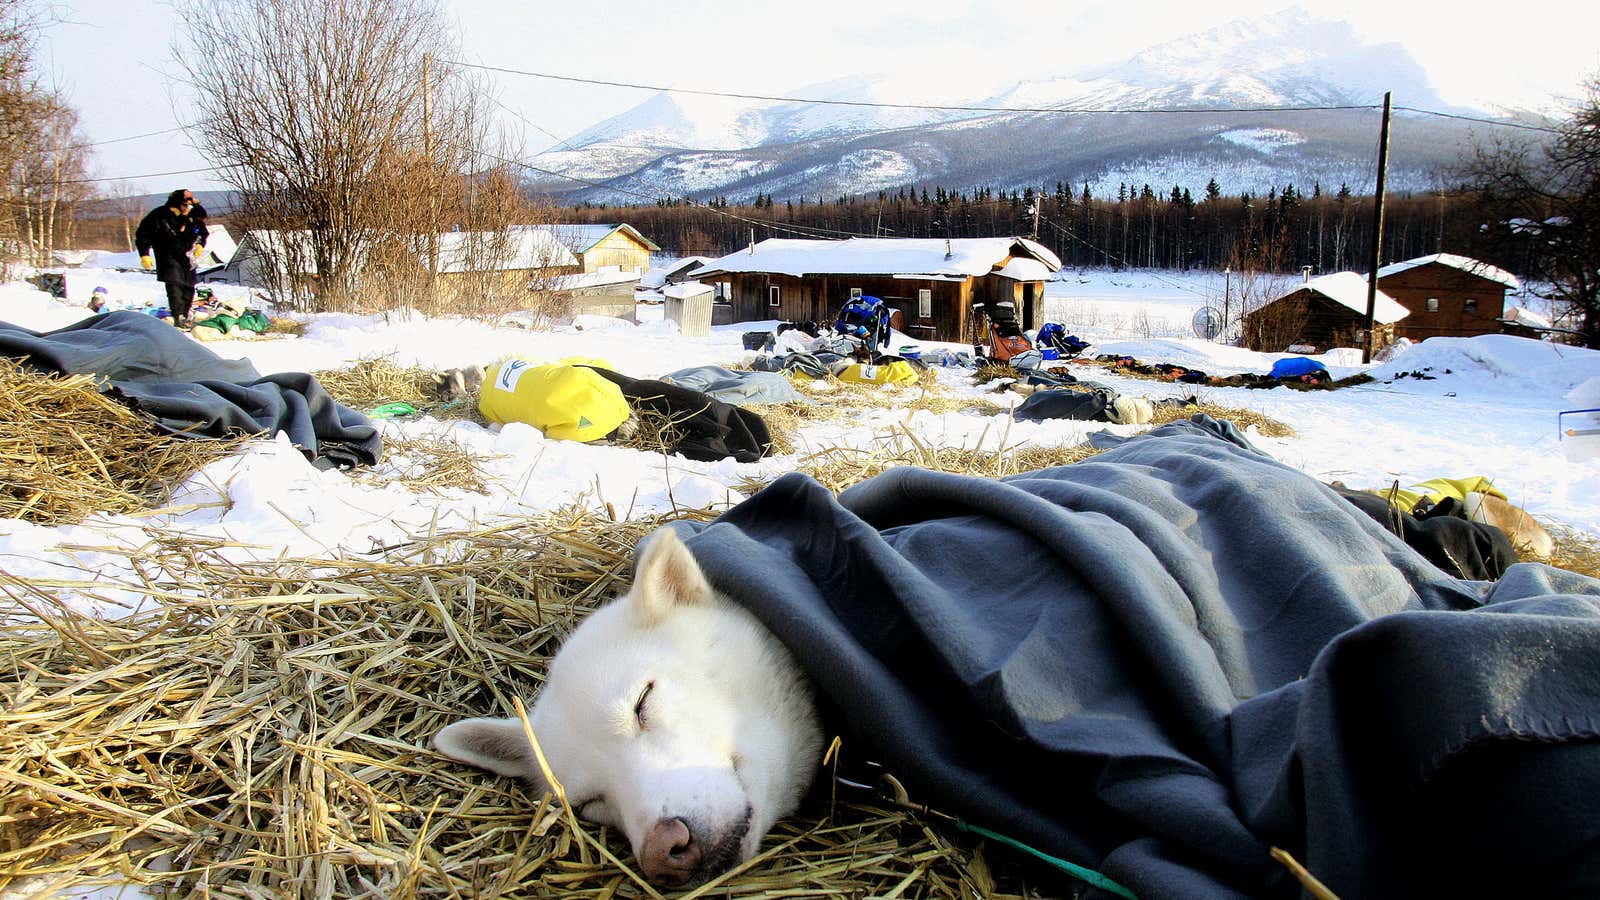 Well-loved: A Norwegian sled dog naps under a blanket during a break in the Iditarod sled race.